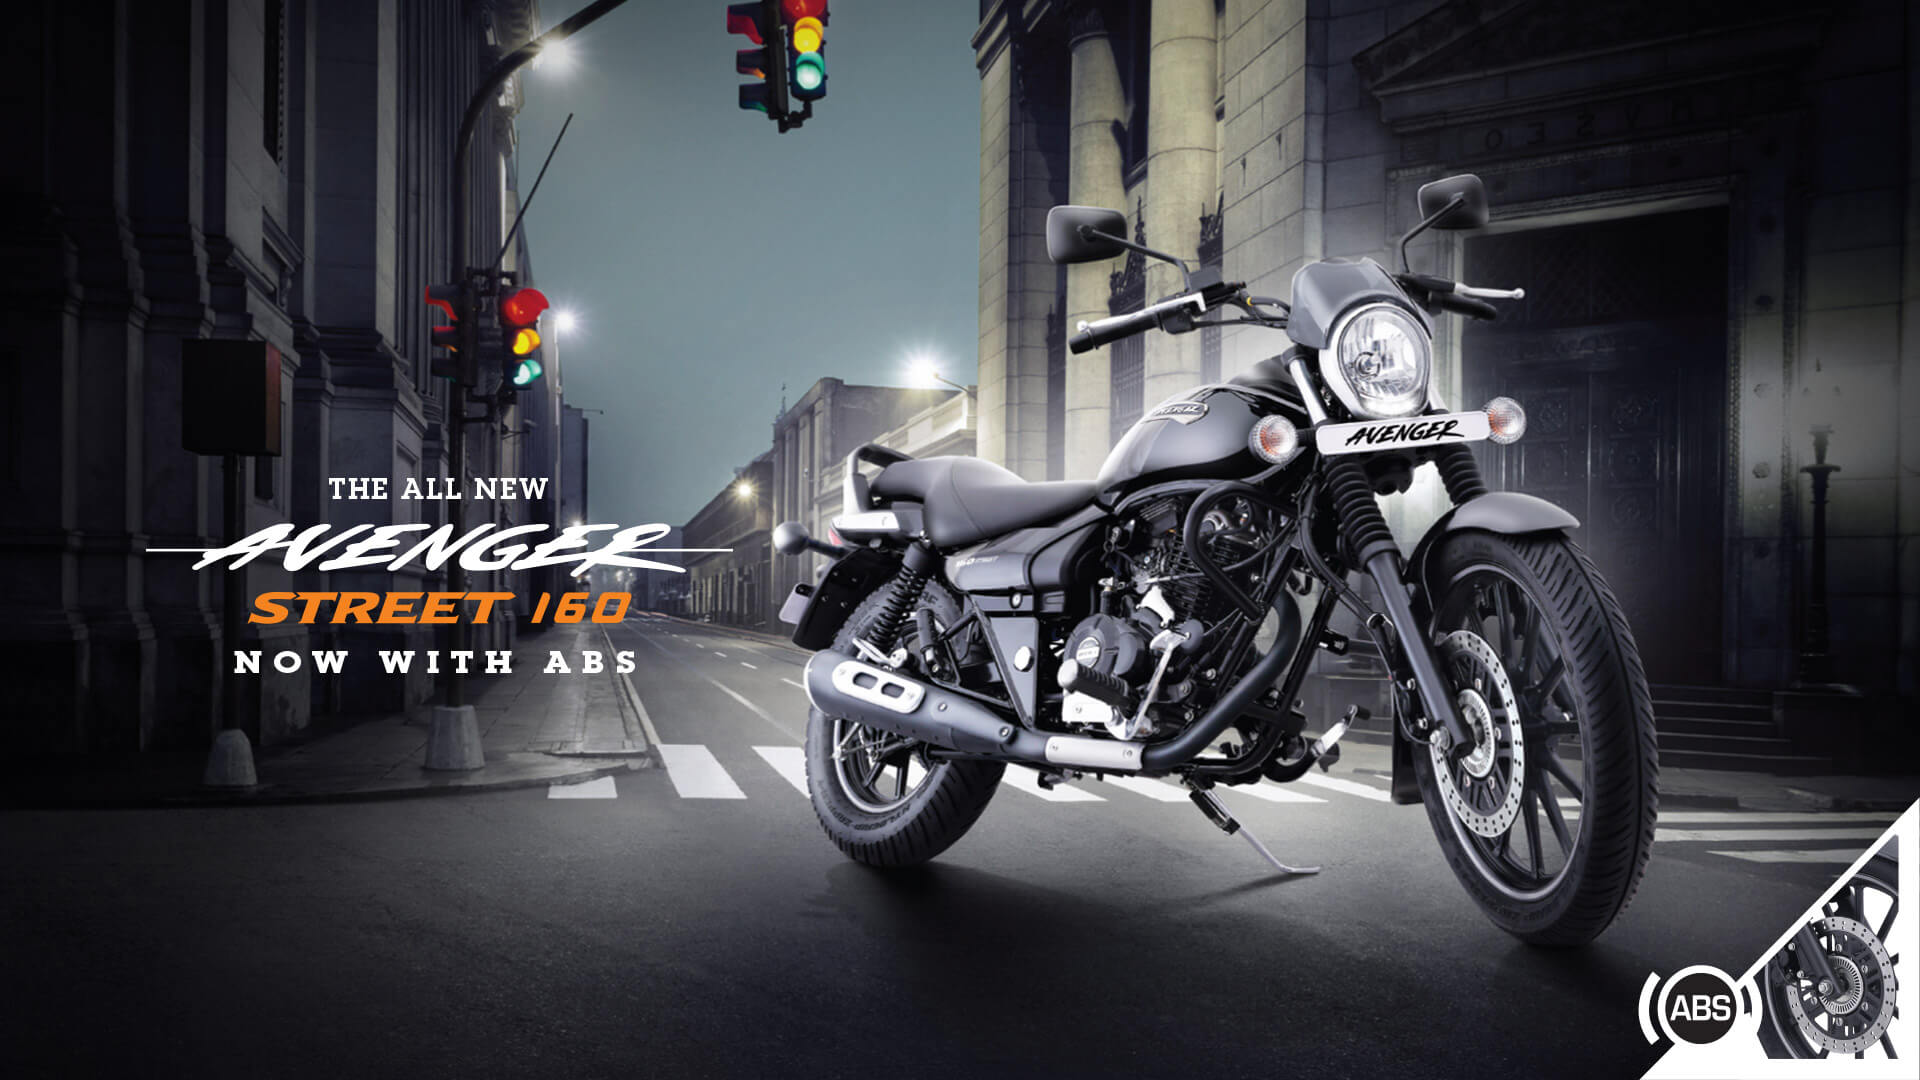 All New Black color bajaj avenger street 160cc with single channel abs